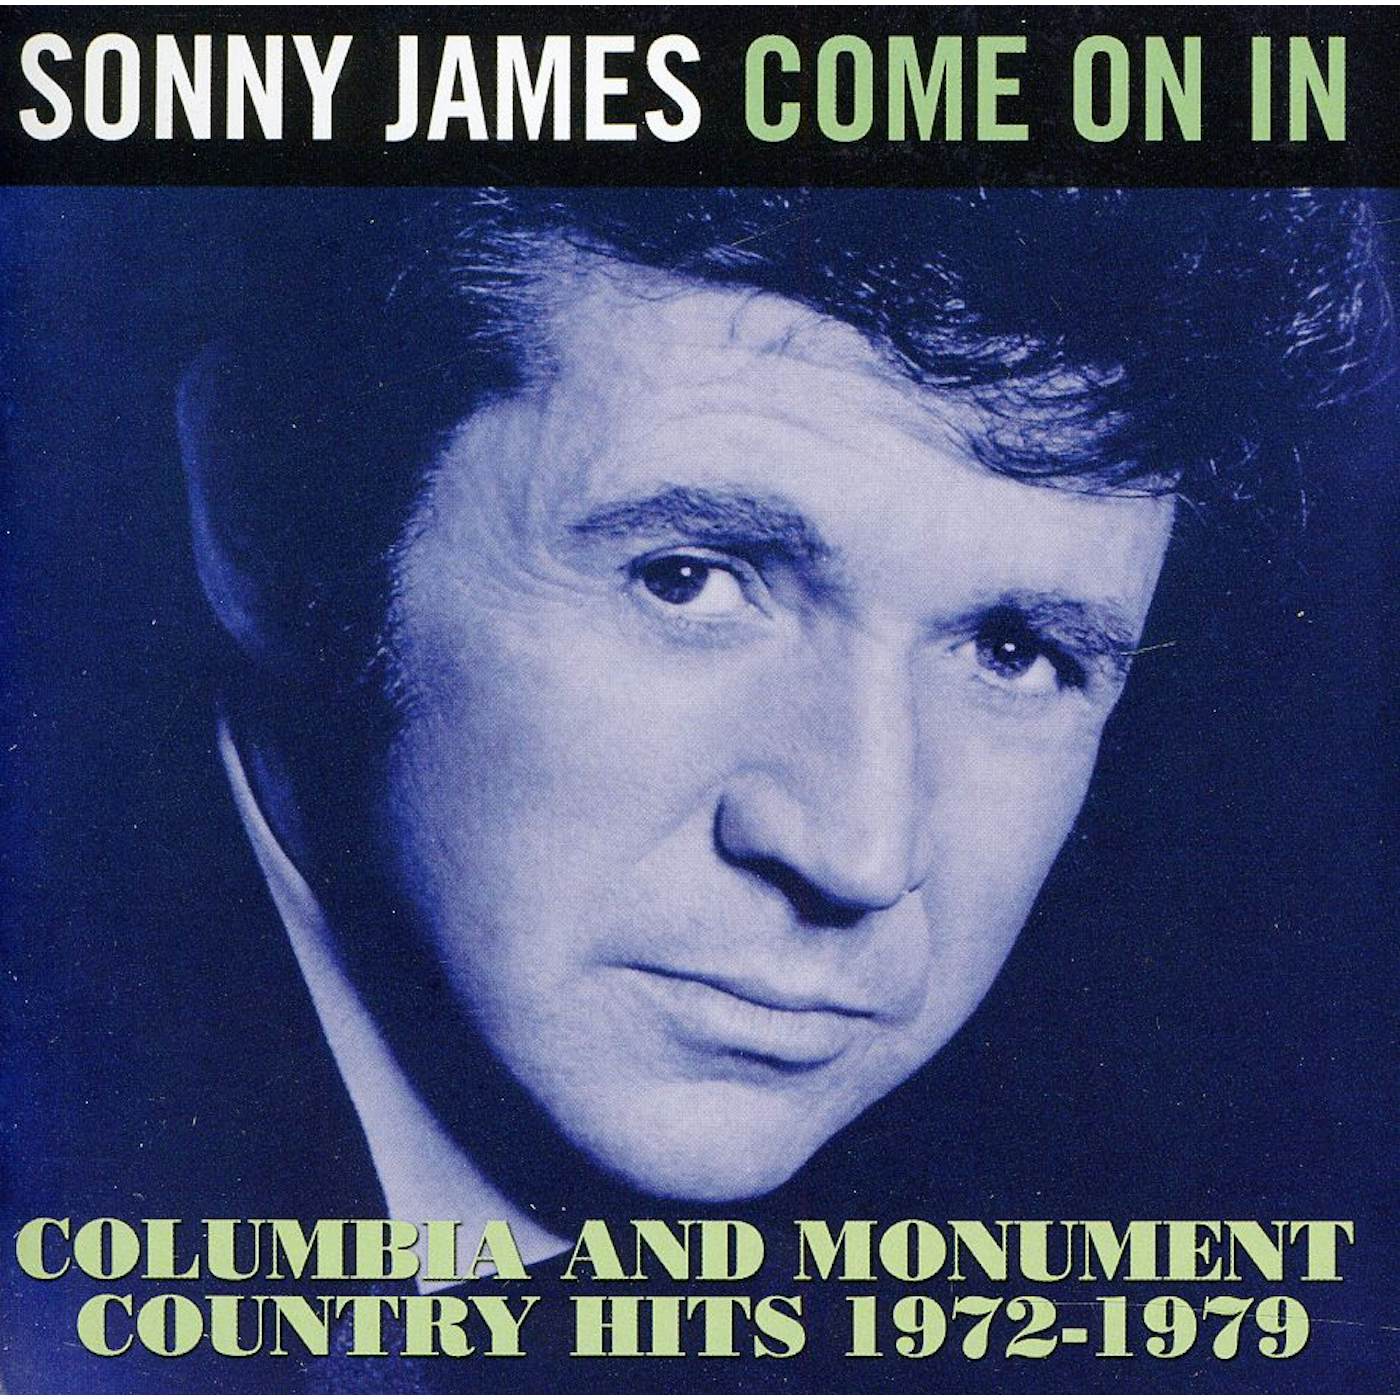 Sonny James COME ON IN: COLUMBIA & MONUMENT COUNTRY 1972-1979 CD